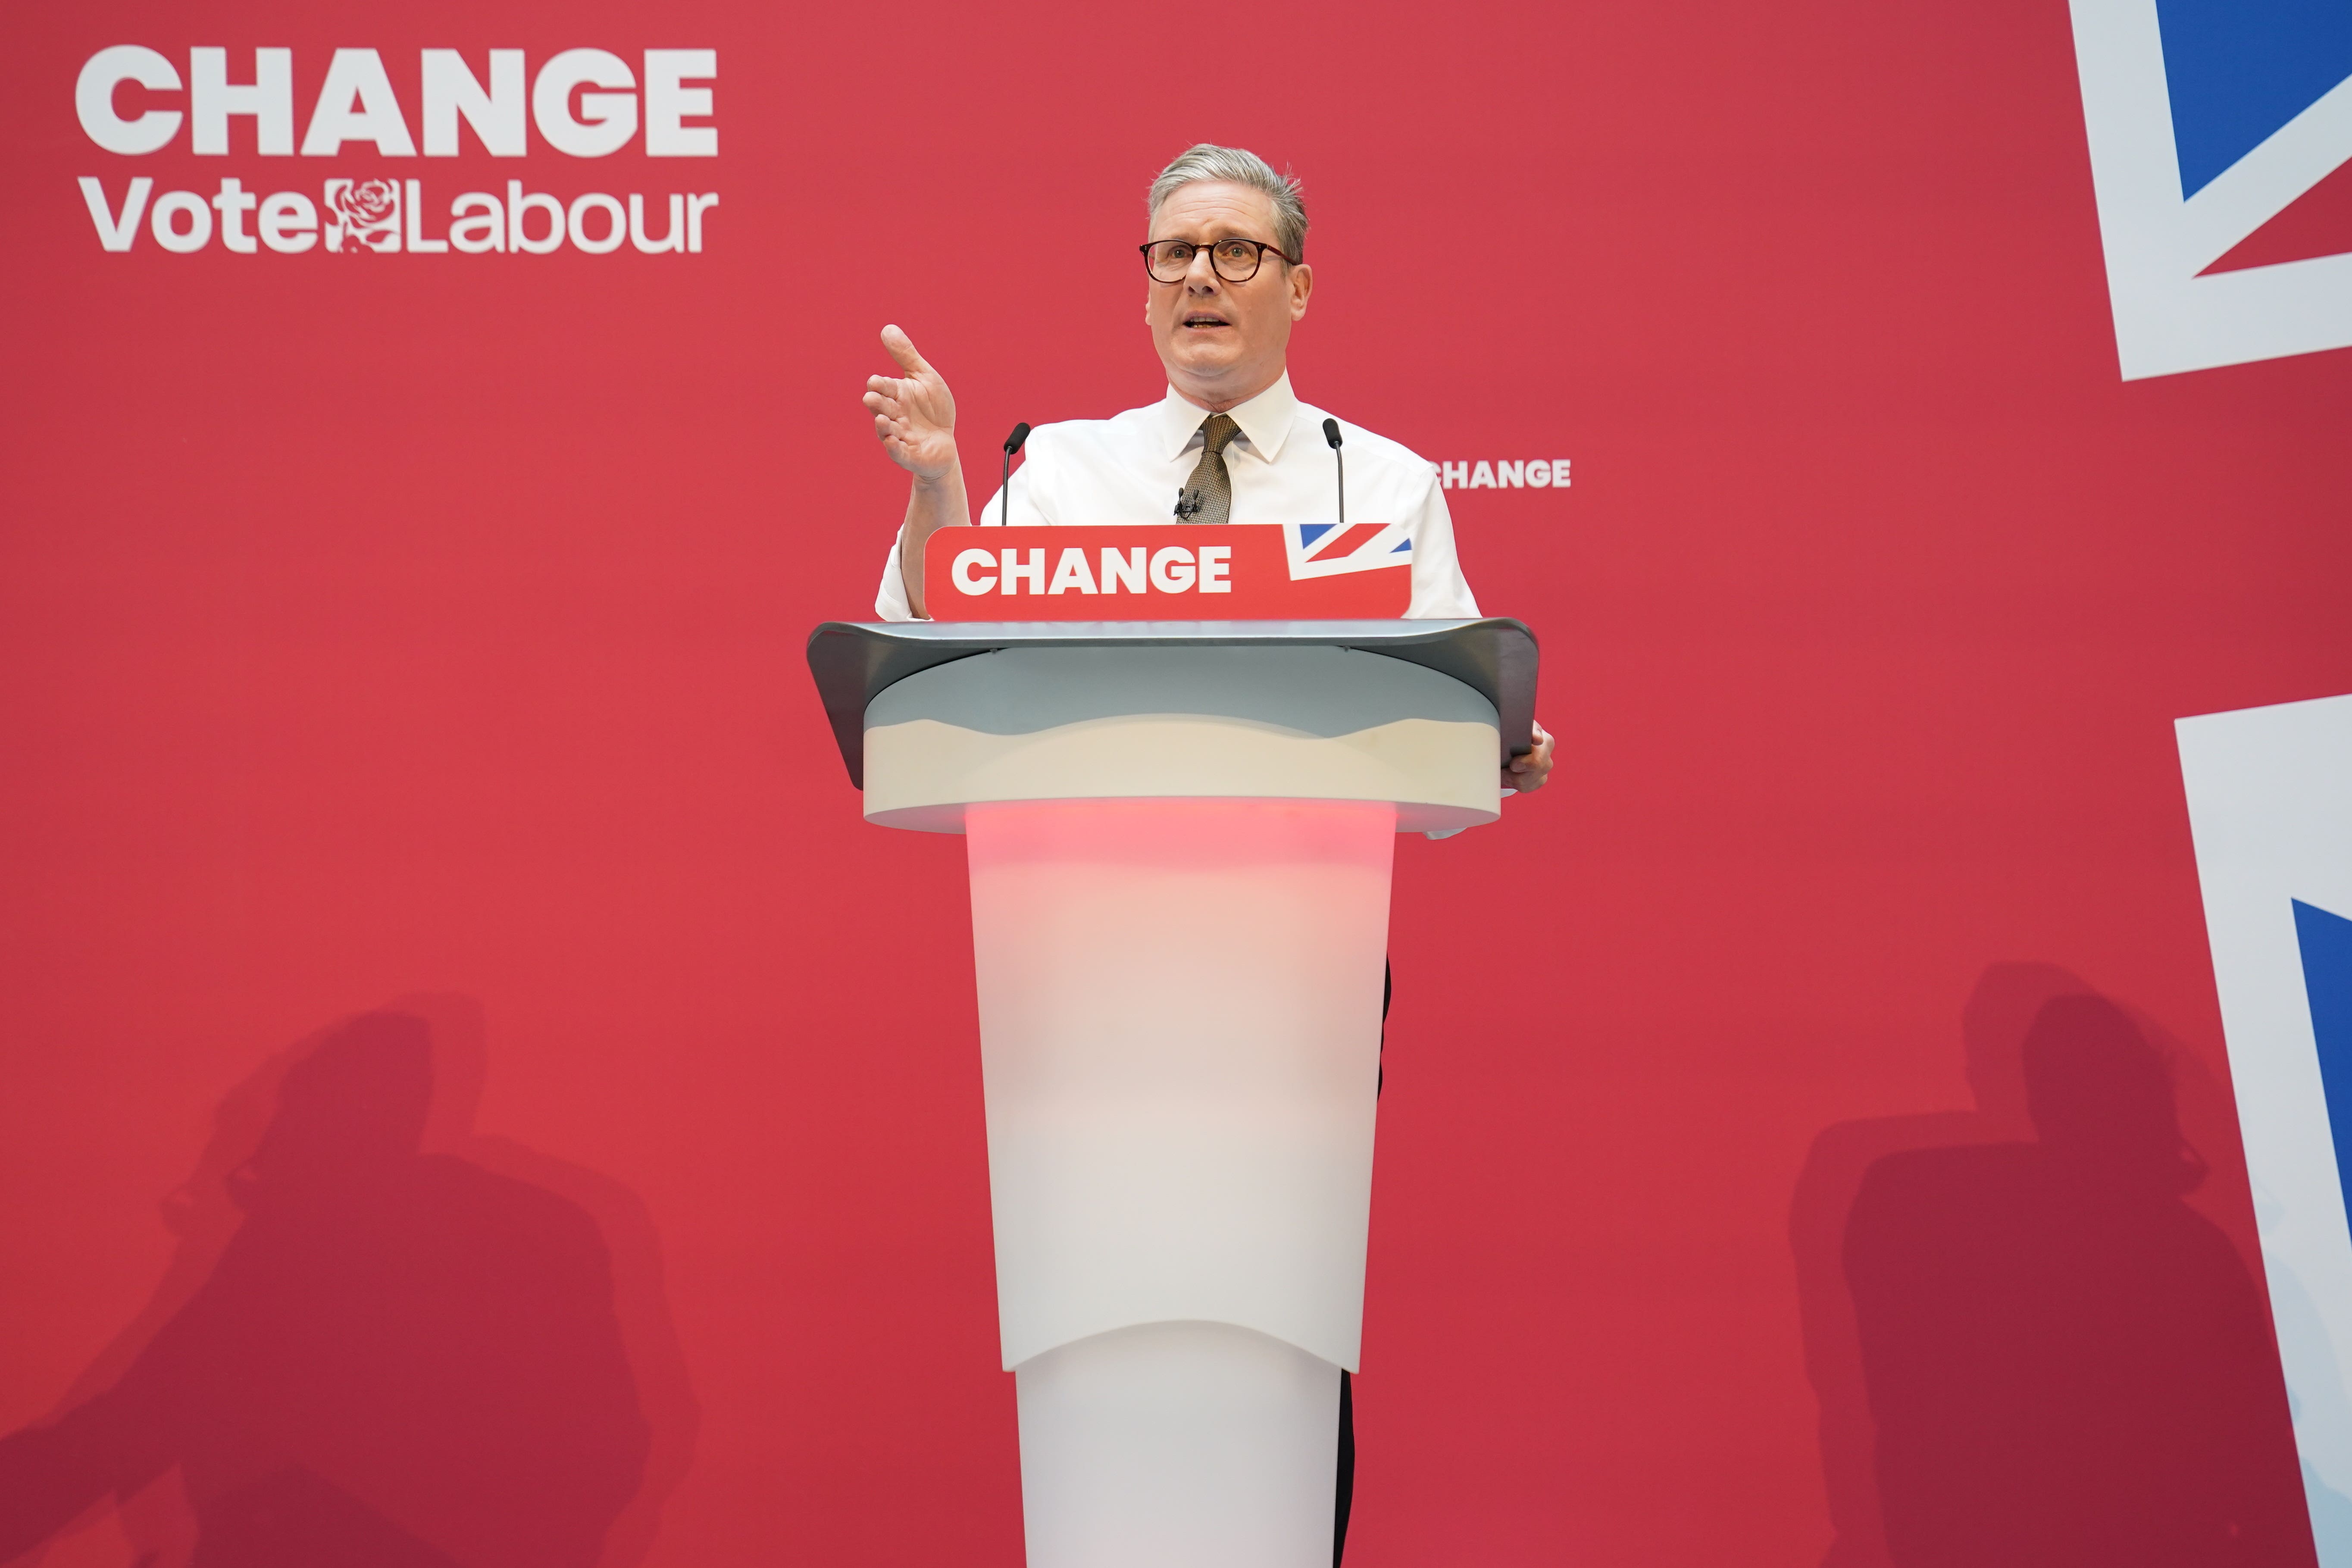 Labour Party leader Sir Keir Starmer launched his party’s manifesto this week